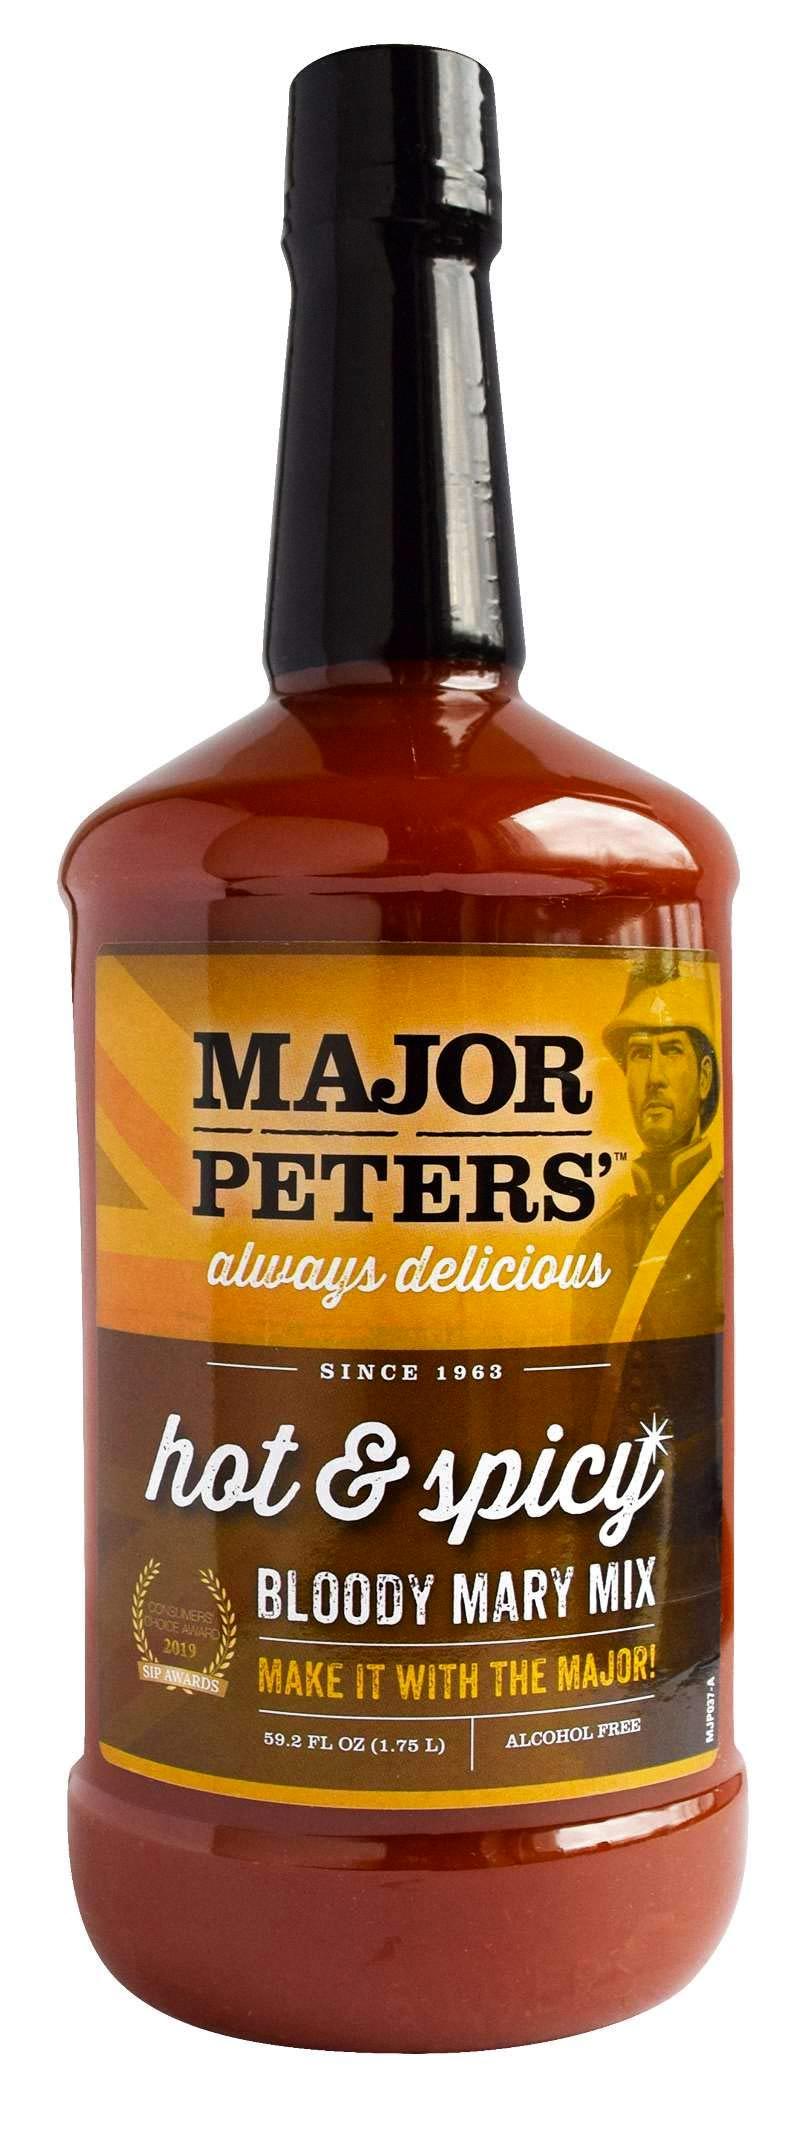 major peters the works bloody mary mix